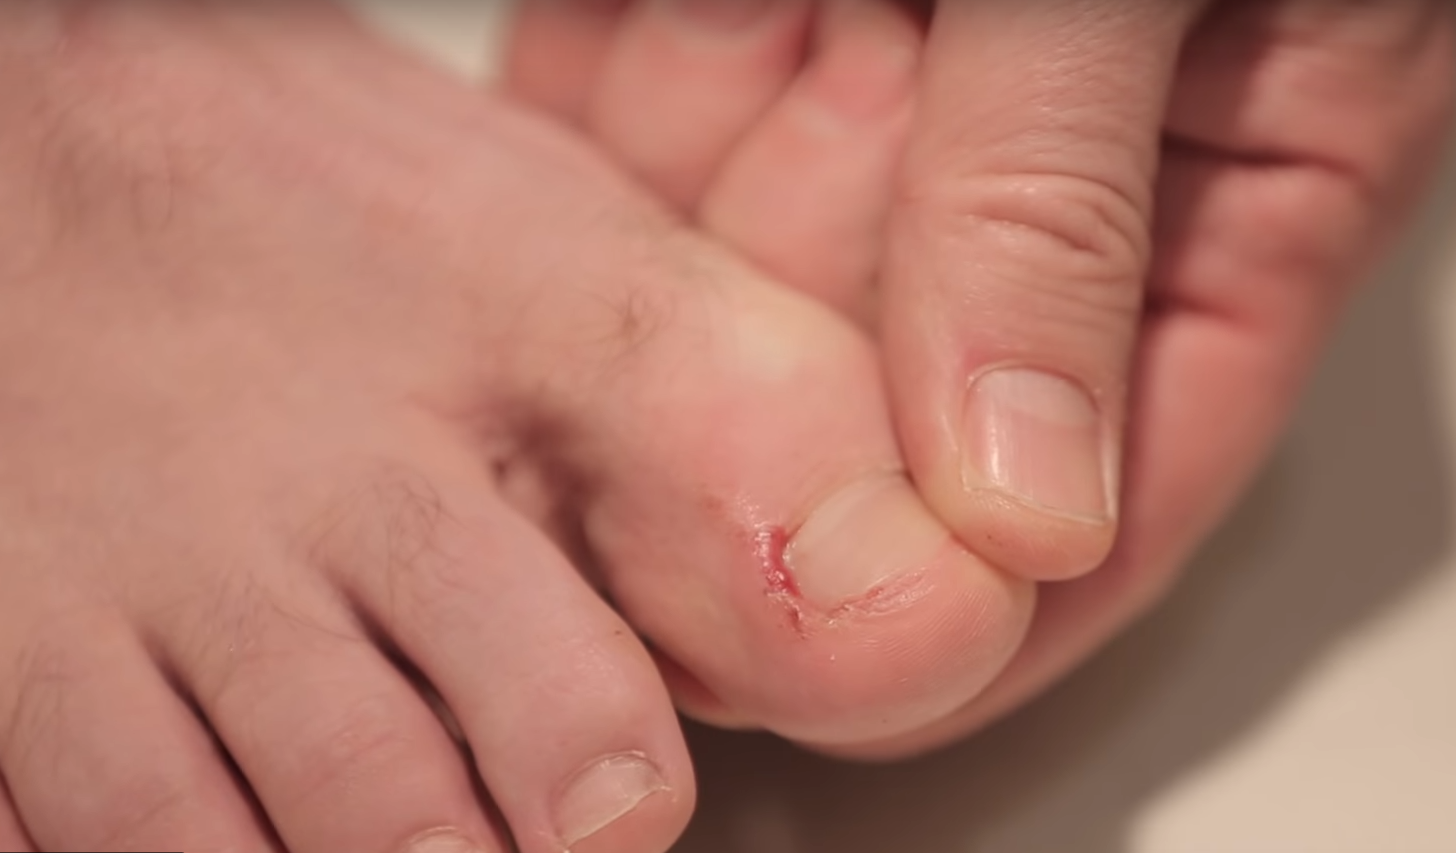 Ouch! How To Fix Ingrown Toenails Now – My FootDr